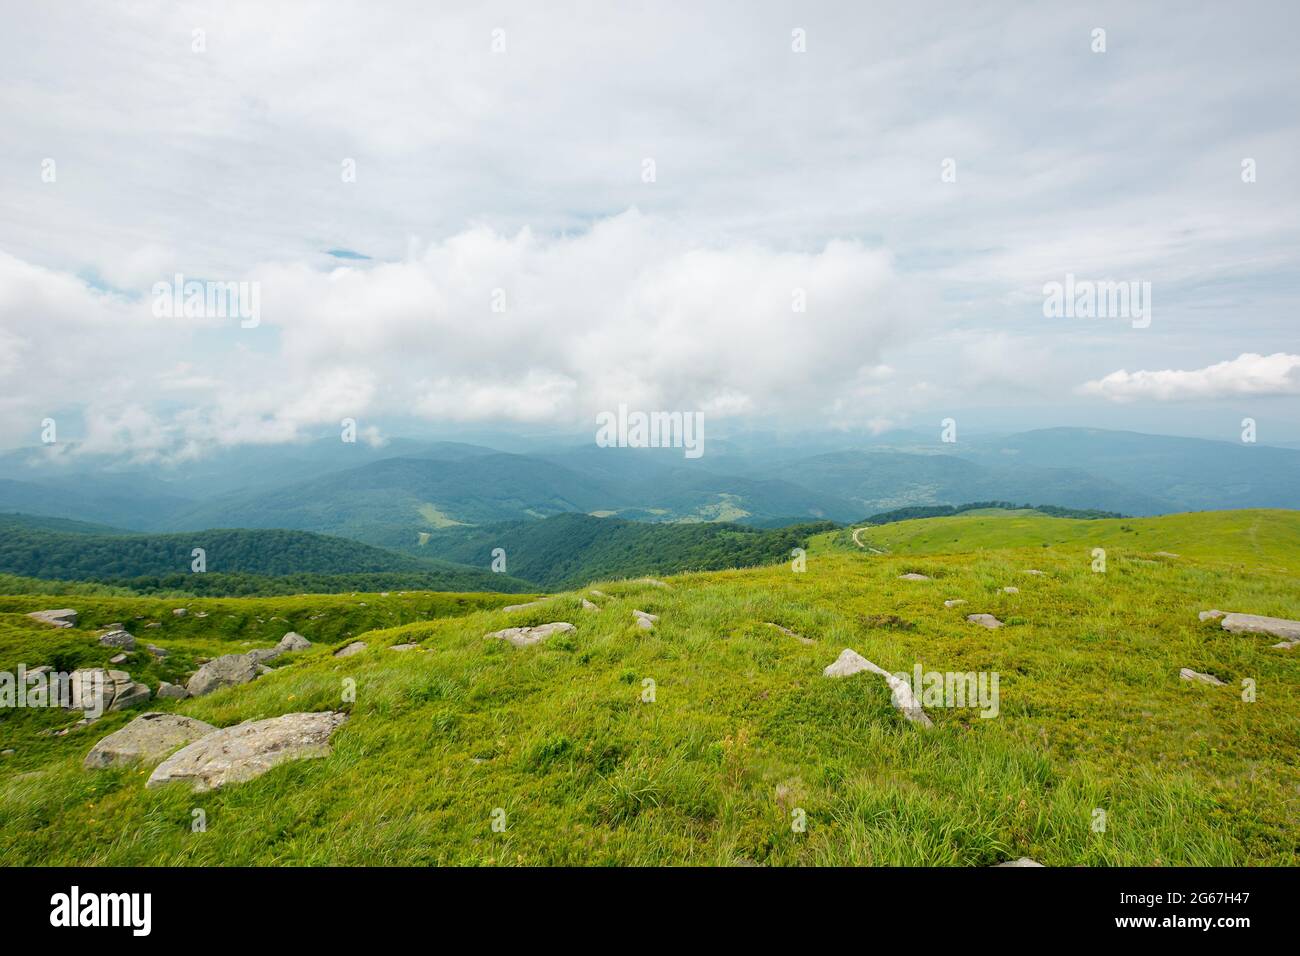 summer mountain landscape. beautiful nature scenery. stones on the grassy hills rolling in to the distant ridge beneath a cloudy sky. travel back coun Stock Photo